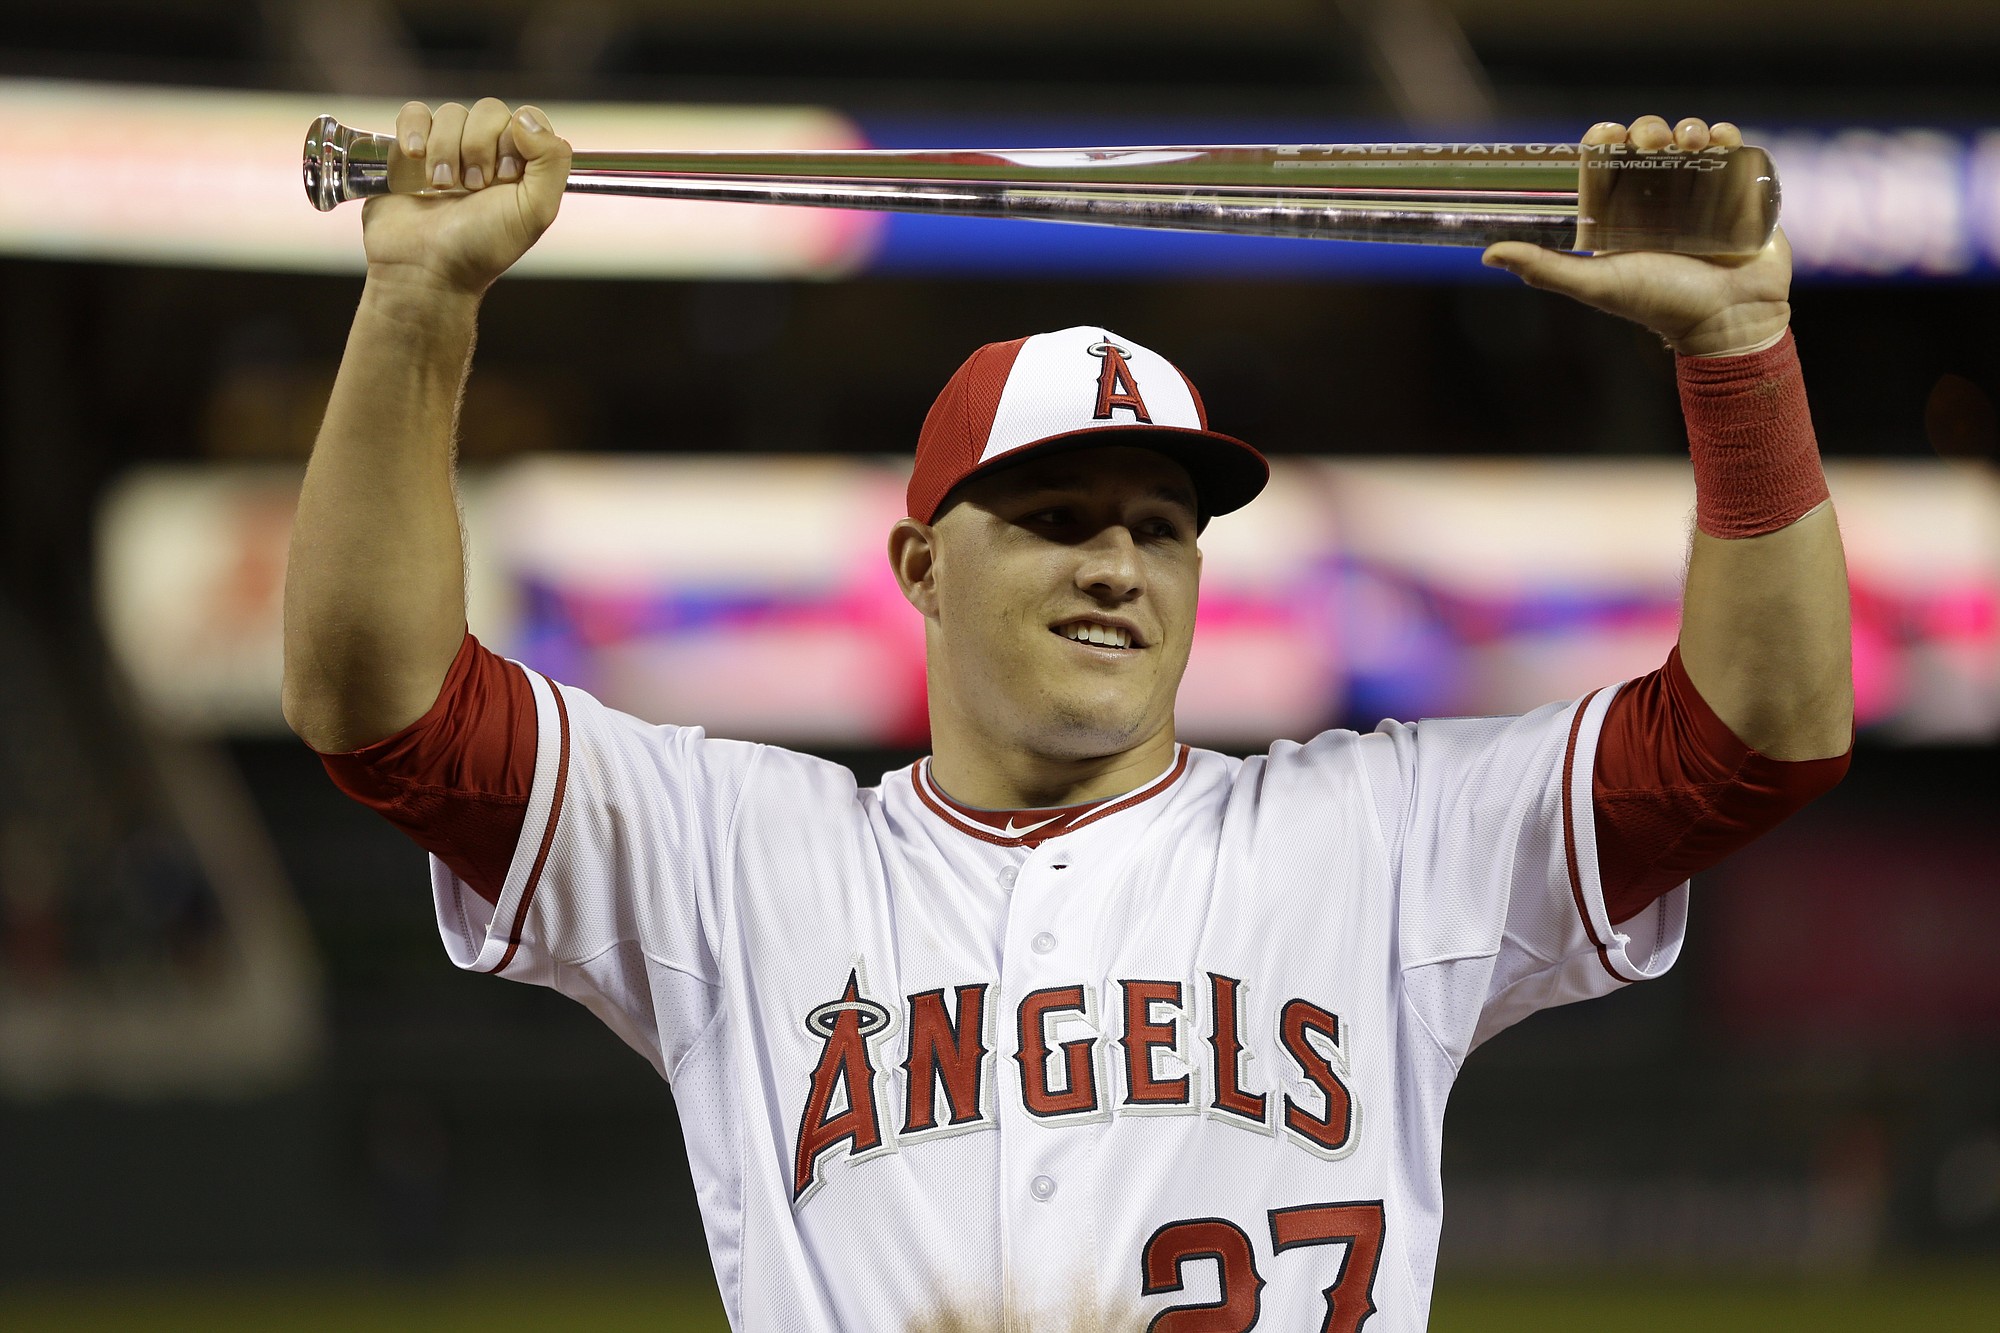 American League outfielder Mike Trout, of the Los Angeles Angels, holds the MVP trophy after his team's 5-3 victory over the National League in the MLB All-Star Game, Tuesday, July 15, 2014, in Minneapolis.